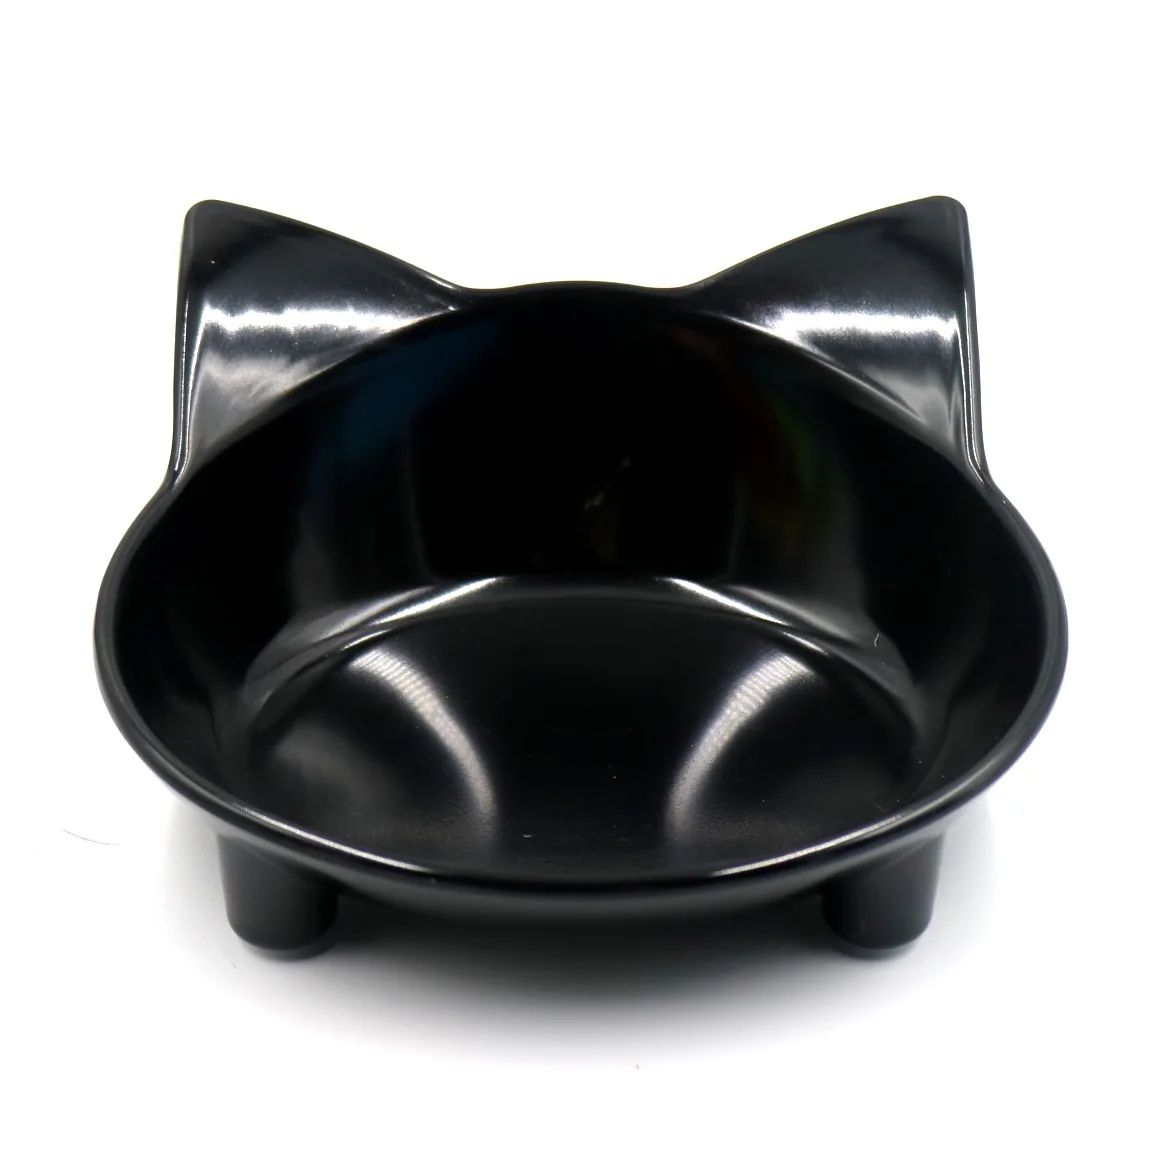 

Ultimate Cat Bowl for Non Slip Shallow and Fatigue Relief Melamine Pet Food Bowl for Your Feline Friend The Perfect Cat Type